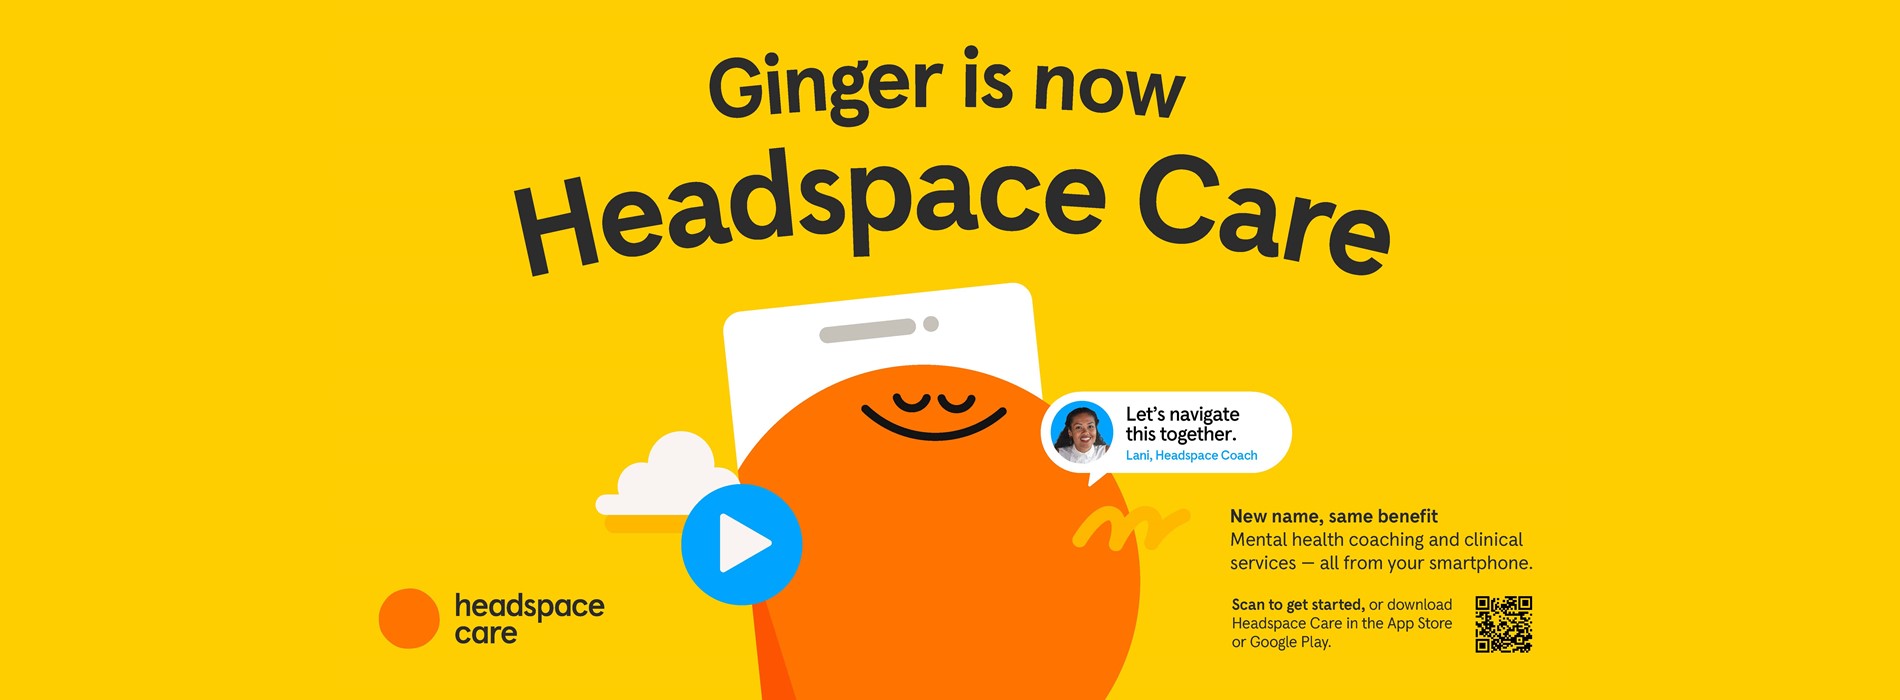 Mental Health Resources Through Ginger